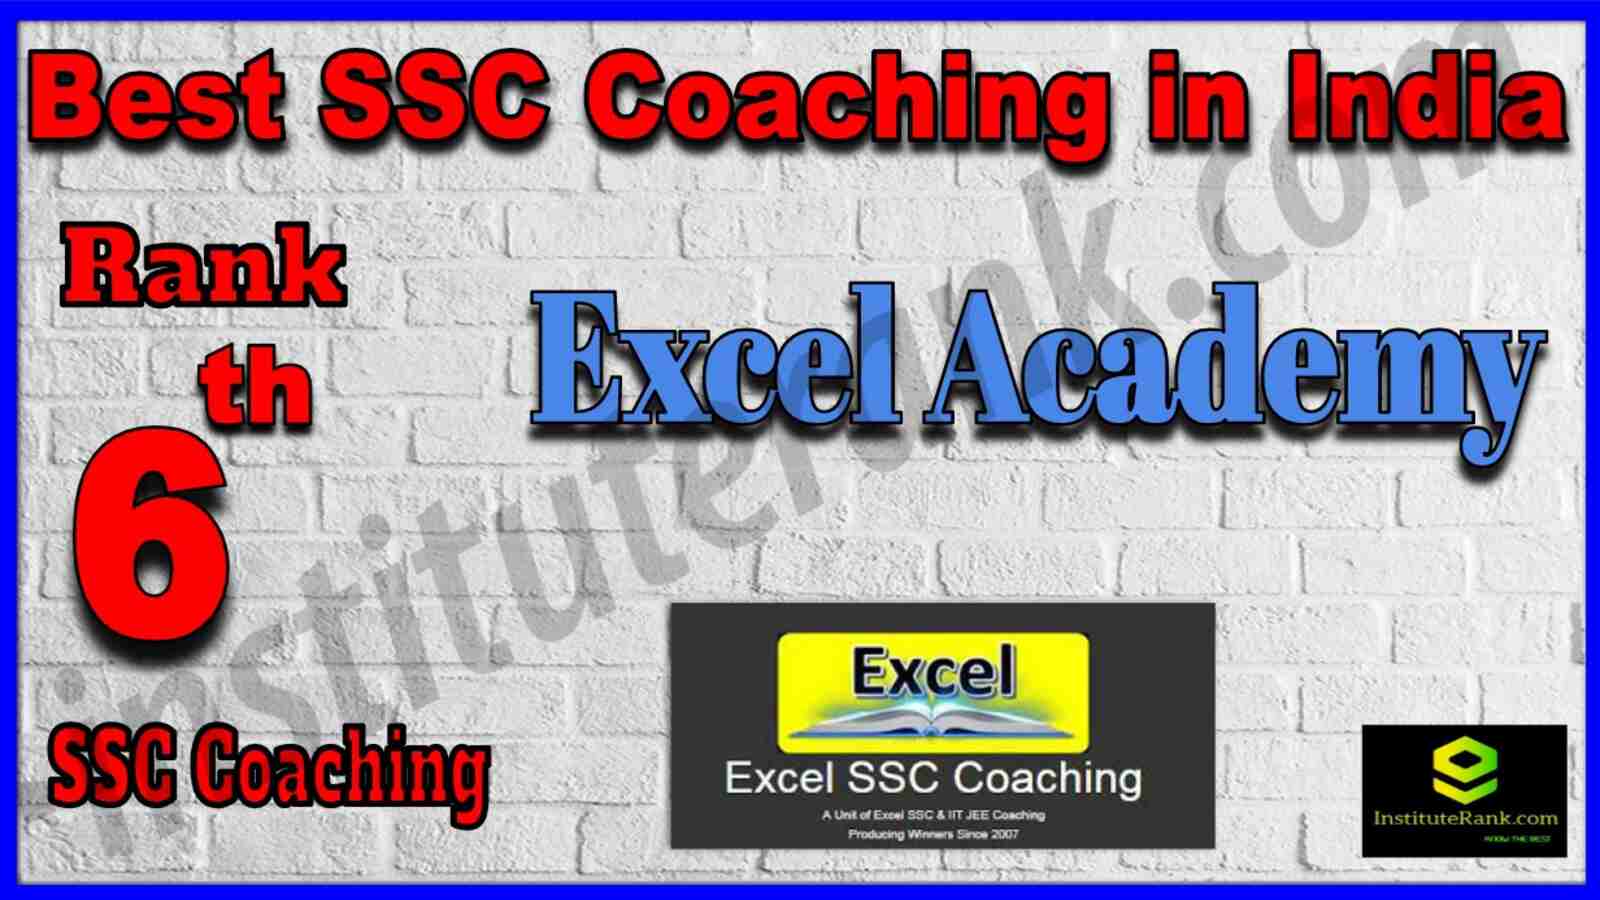 Rank 6 Best SSC Coaching in India